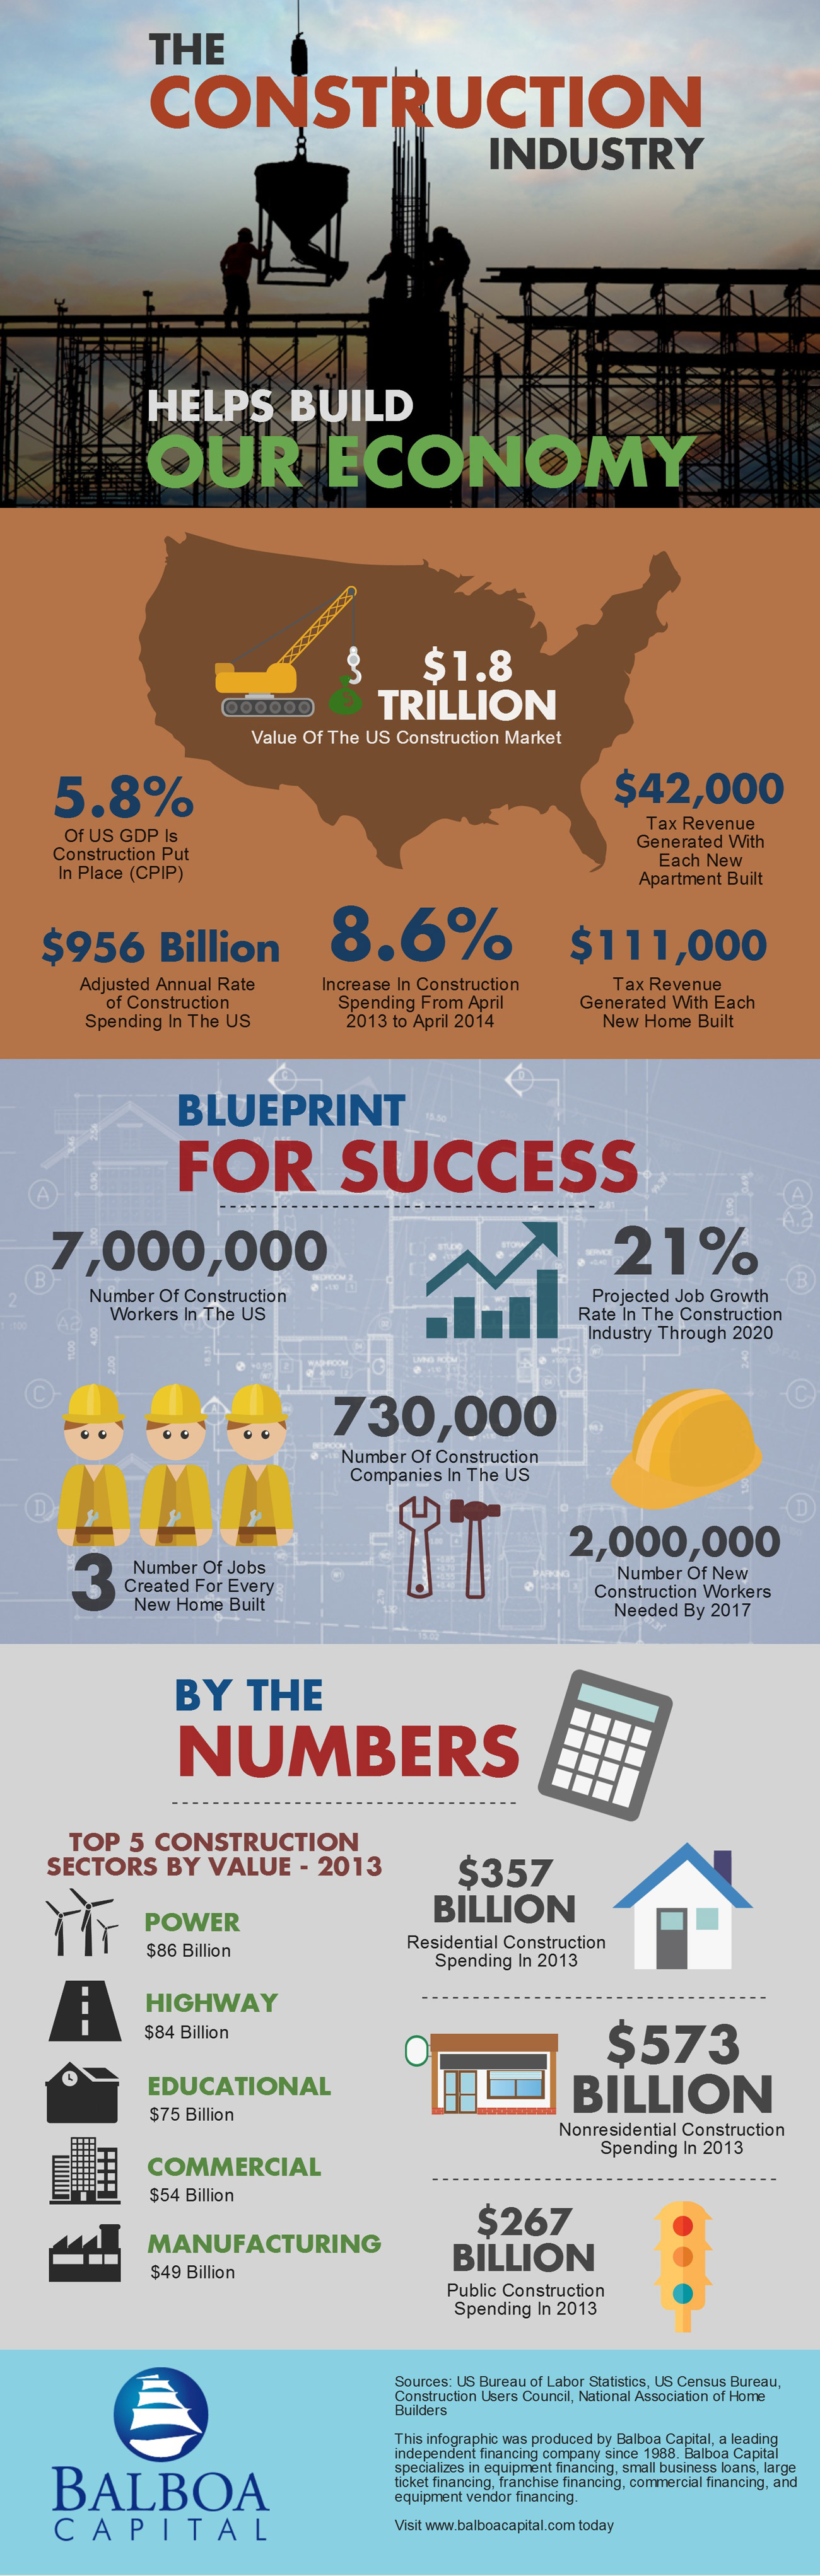 Construction Industry Infographic Created By Balboa Capital